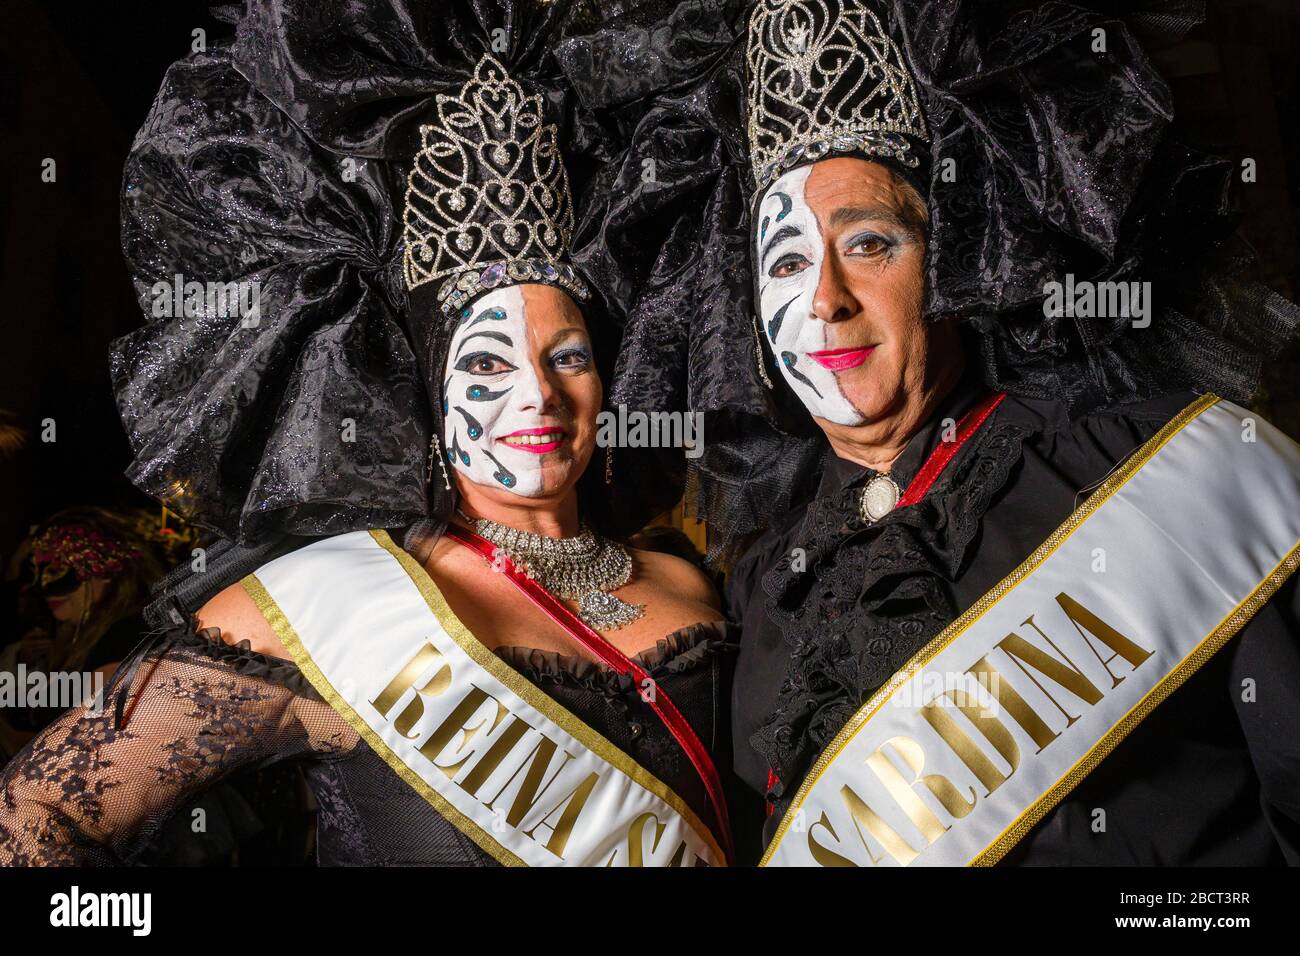 A man and a woman, dressed up as carnival queens and smiling, partying in the streets during the funeral procession Burial of the Sardine Stock Photo